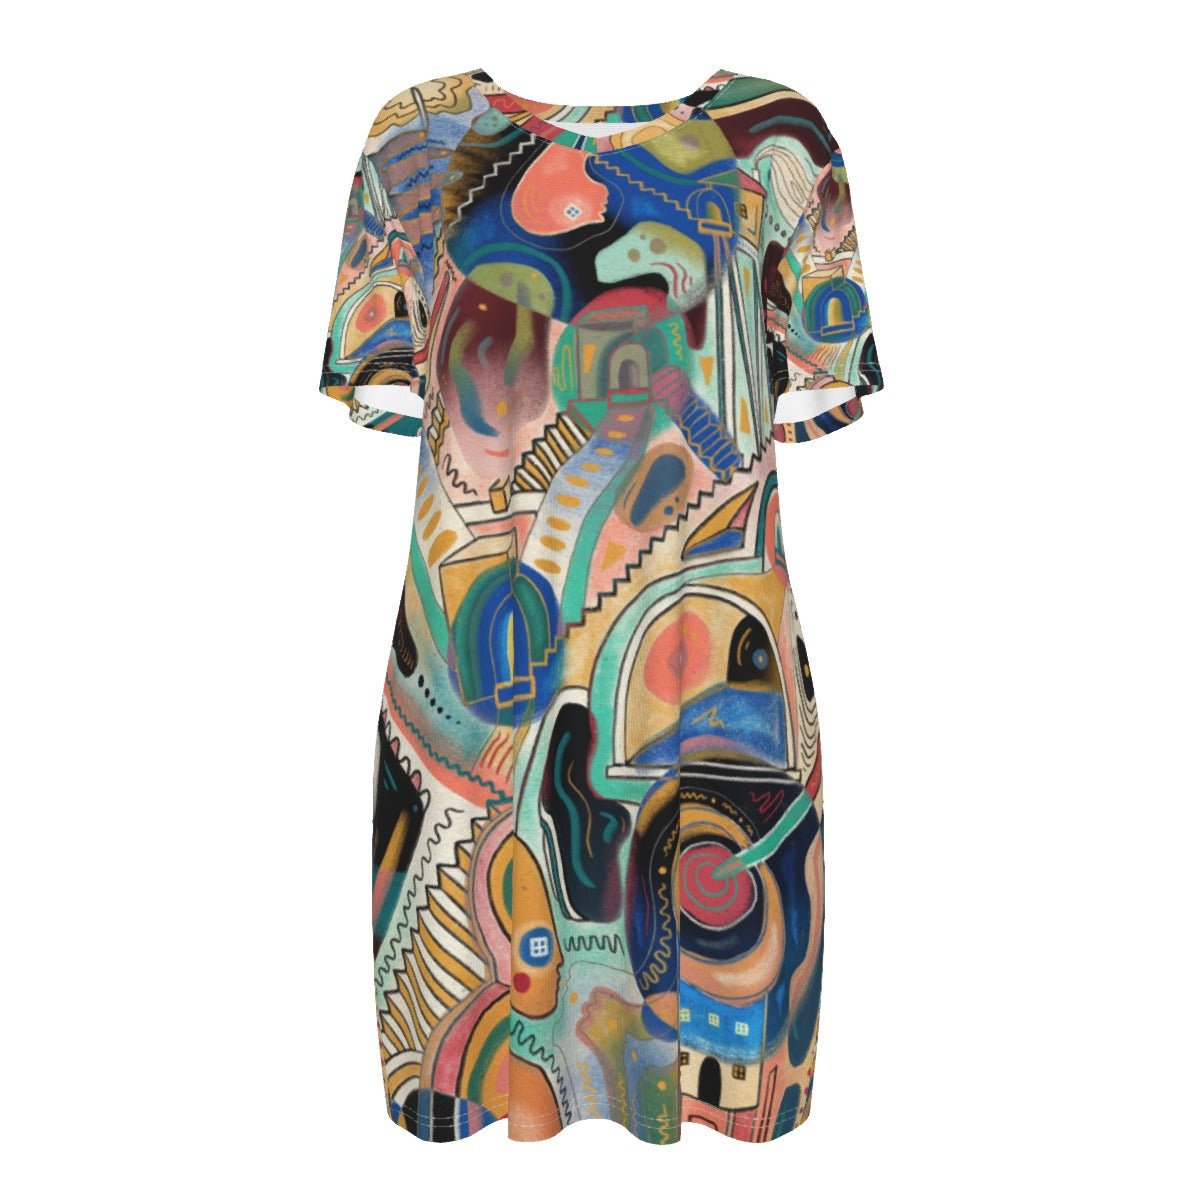 "Candid Cacophony" - Women's Dress | Dresses | All Around Artsy Fashion